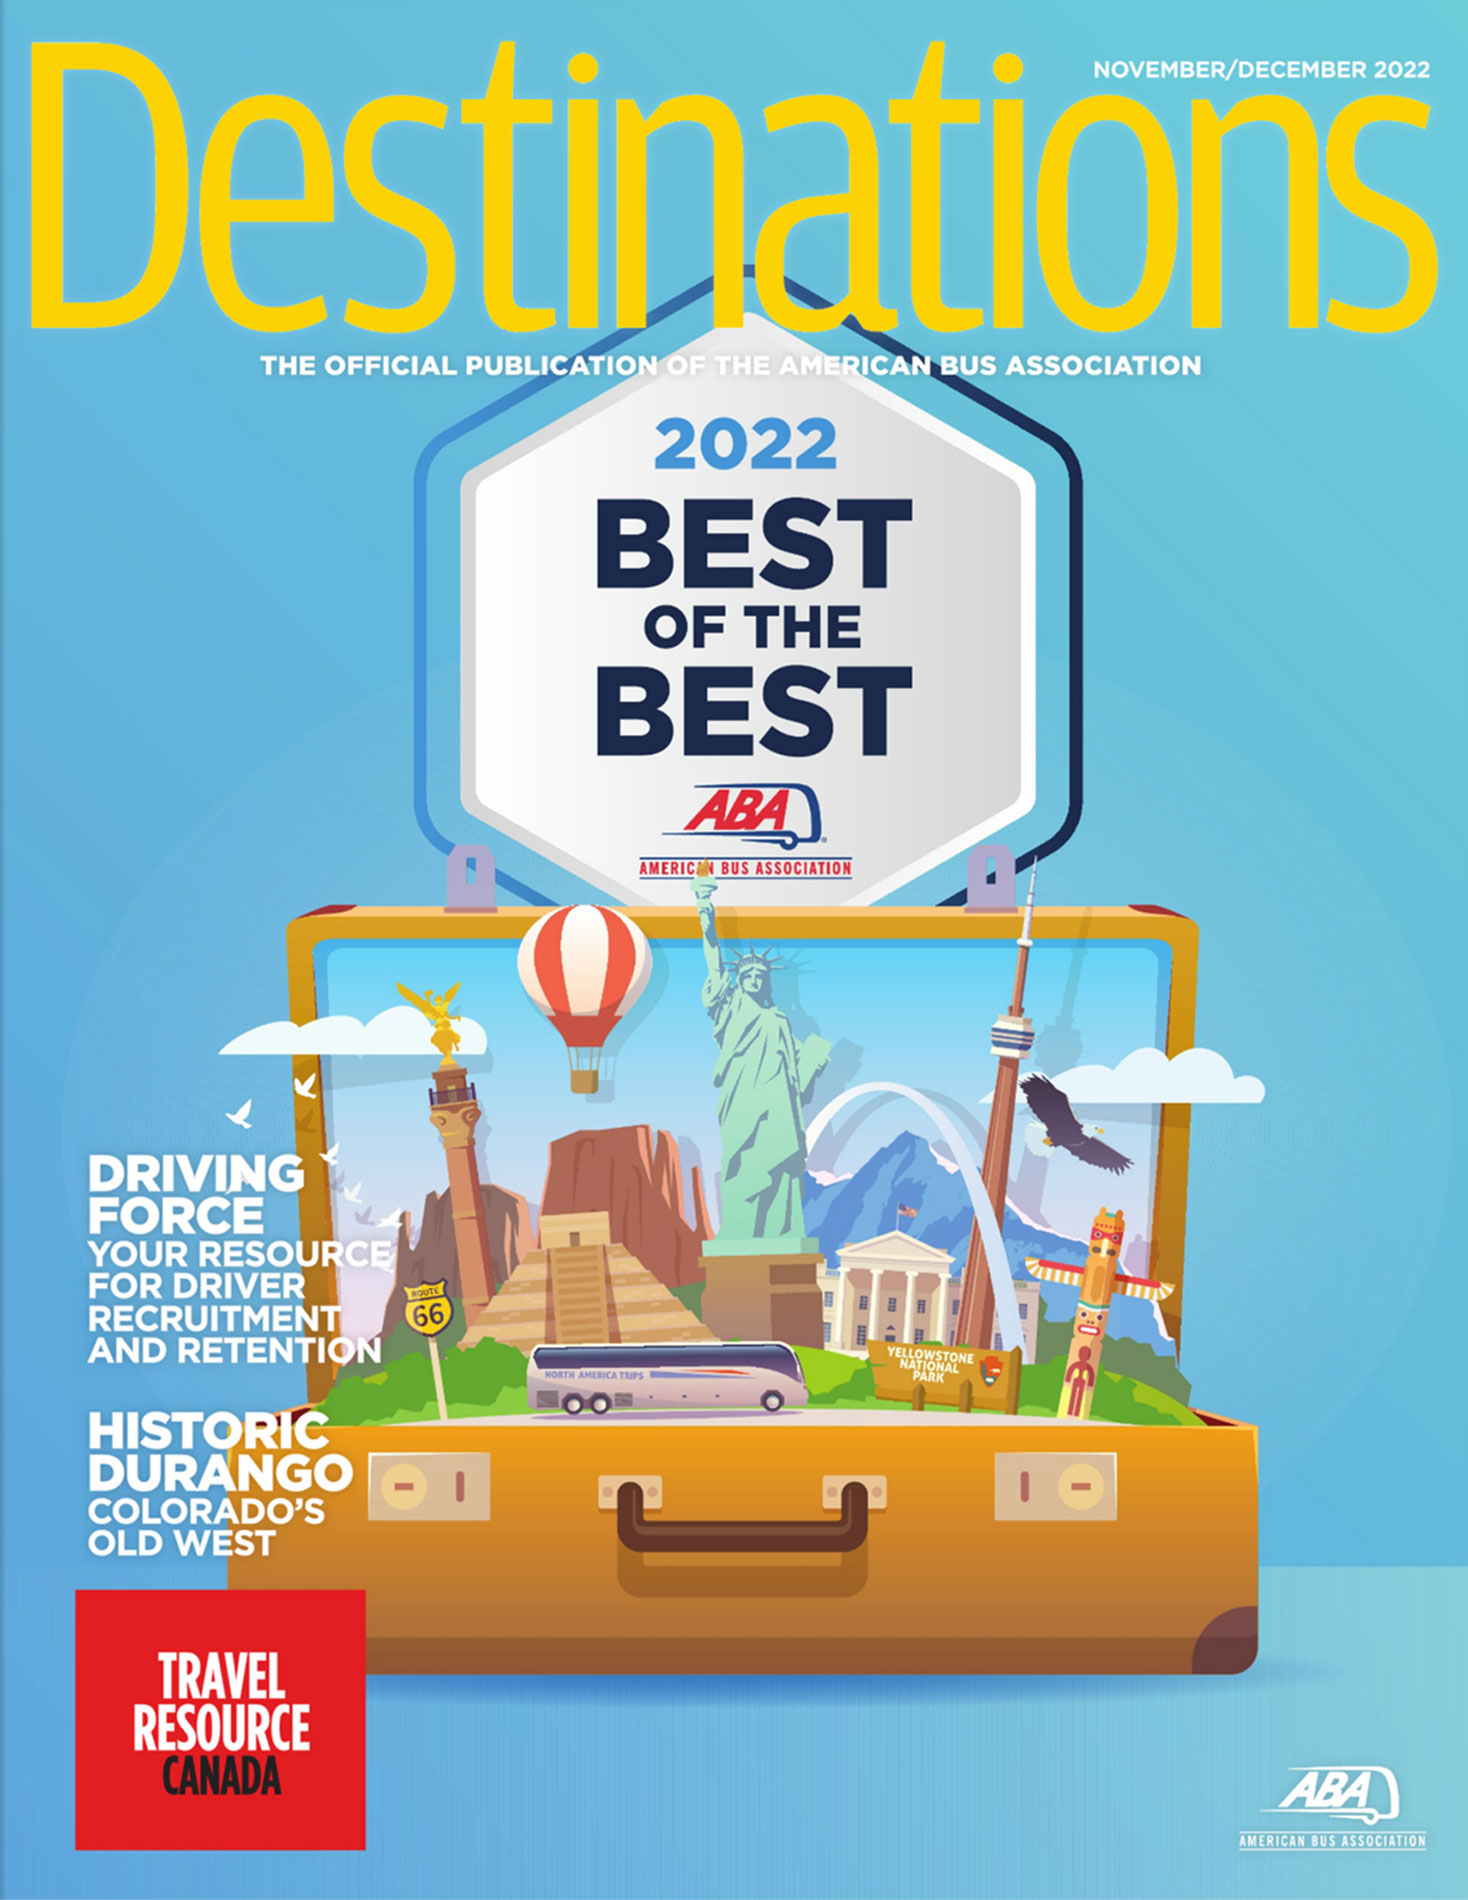 Destinations-Best-of-the-Best-2022